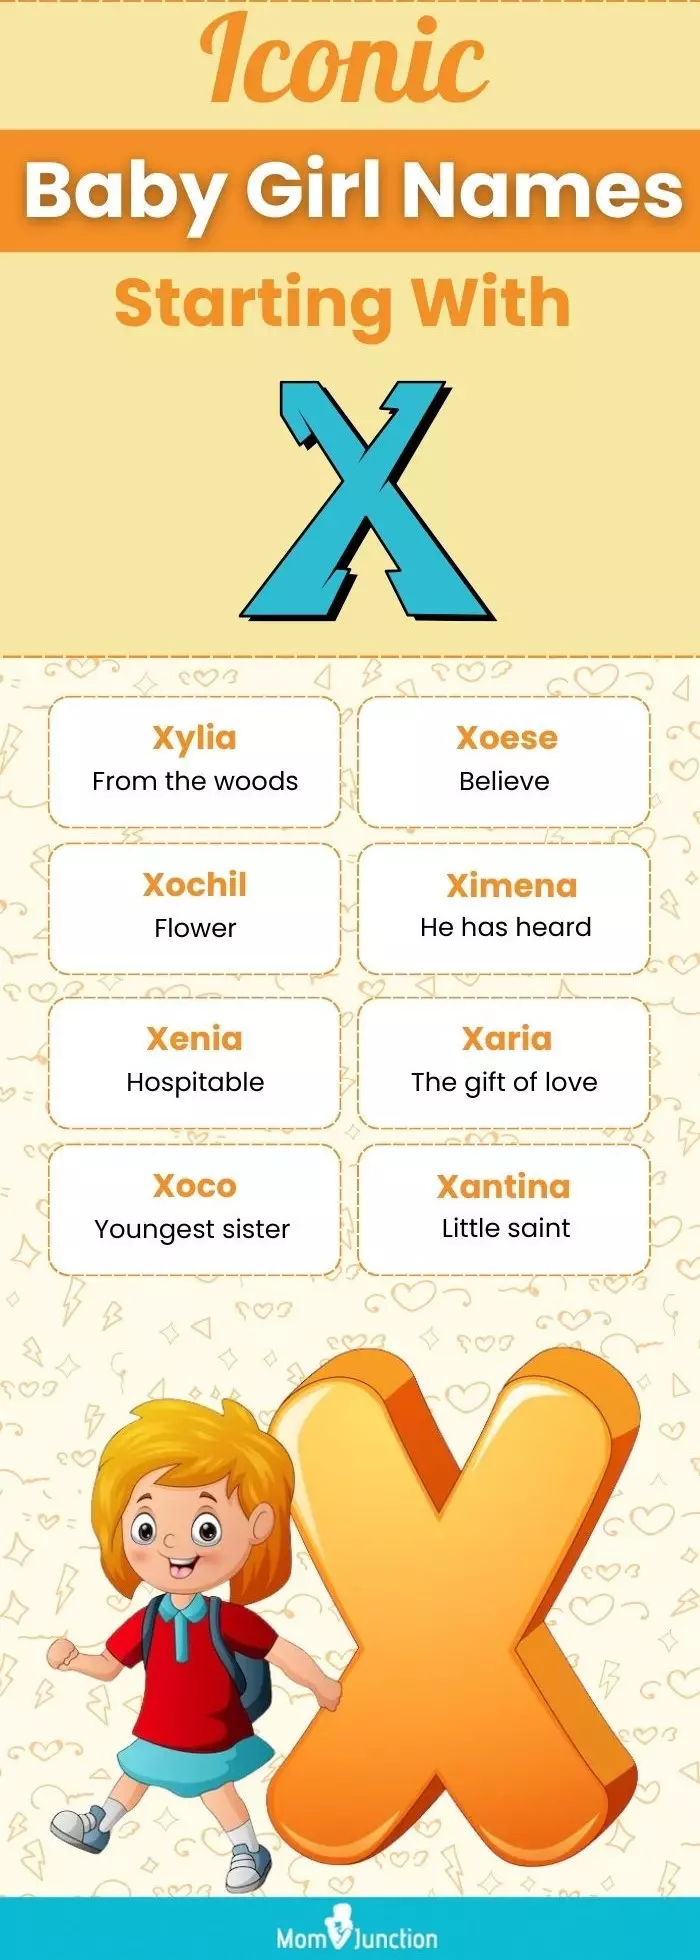 iconic baby girl names starting with x (infographic)